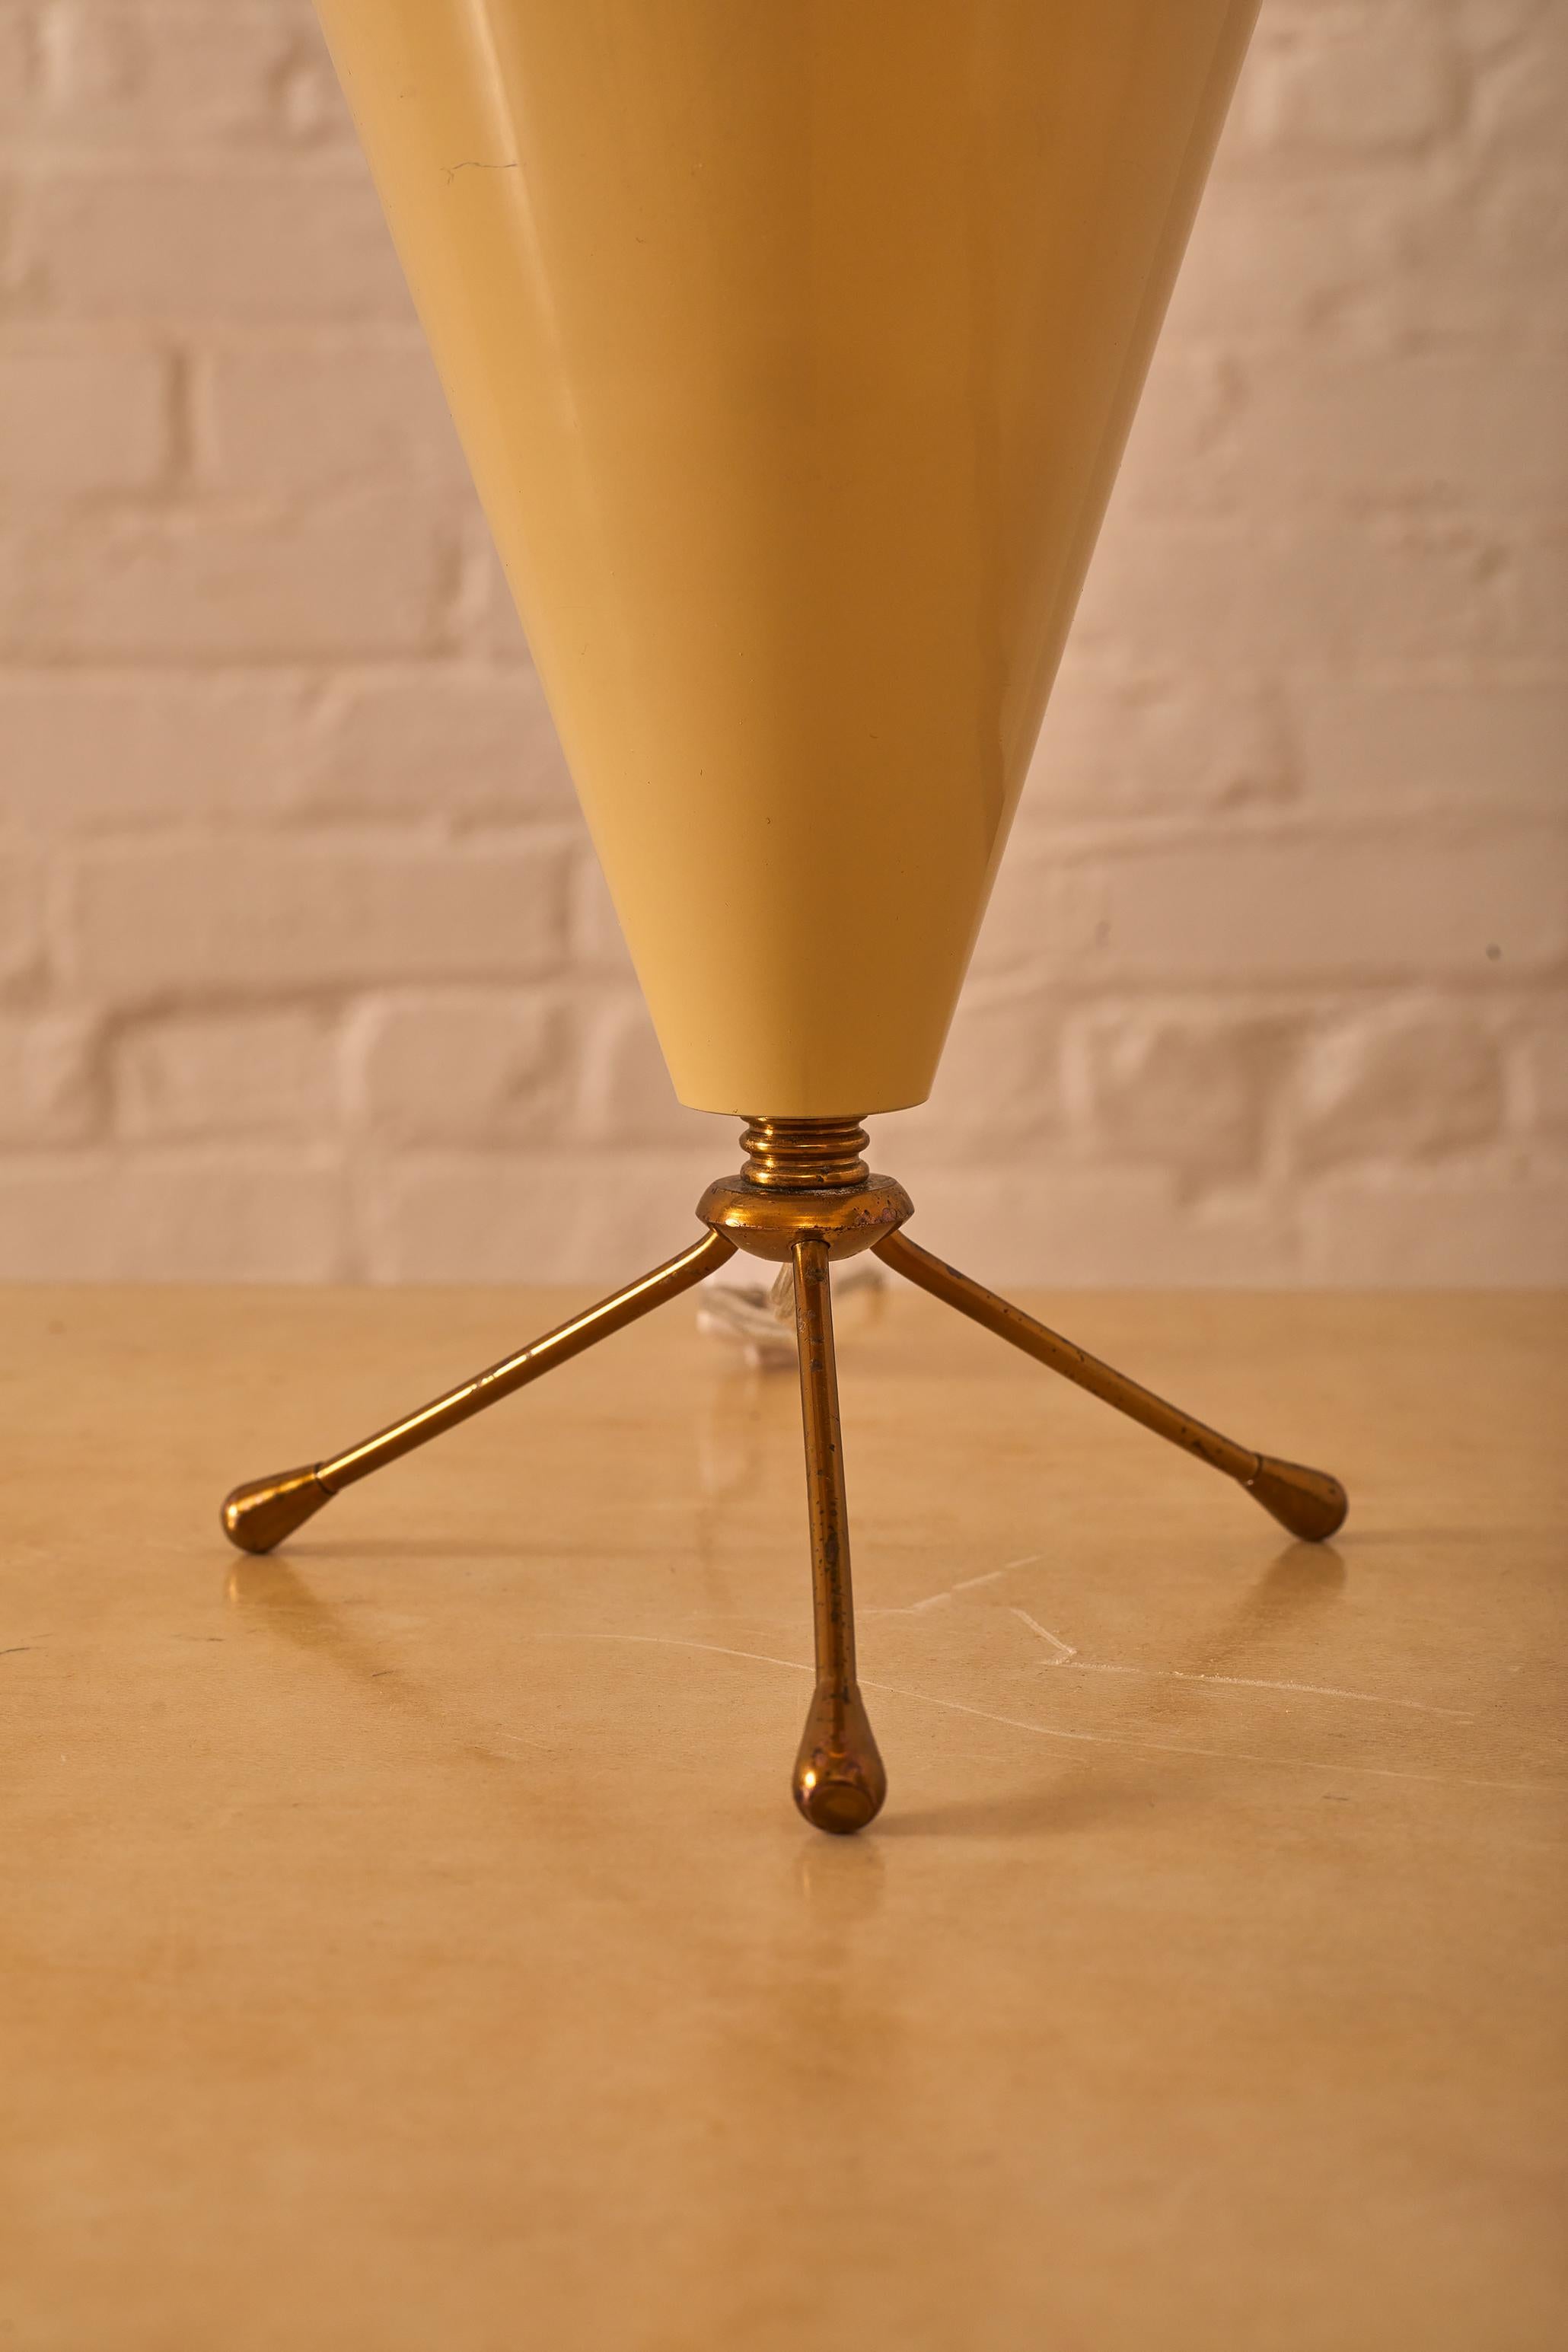 Tripod table lamp in with brass legs. 

